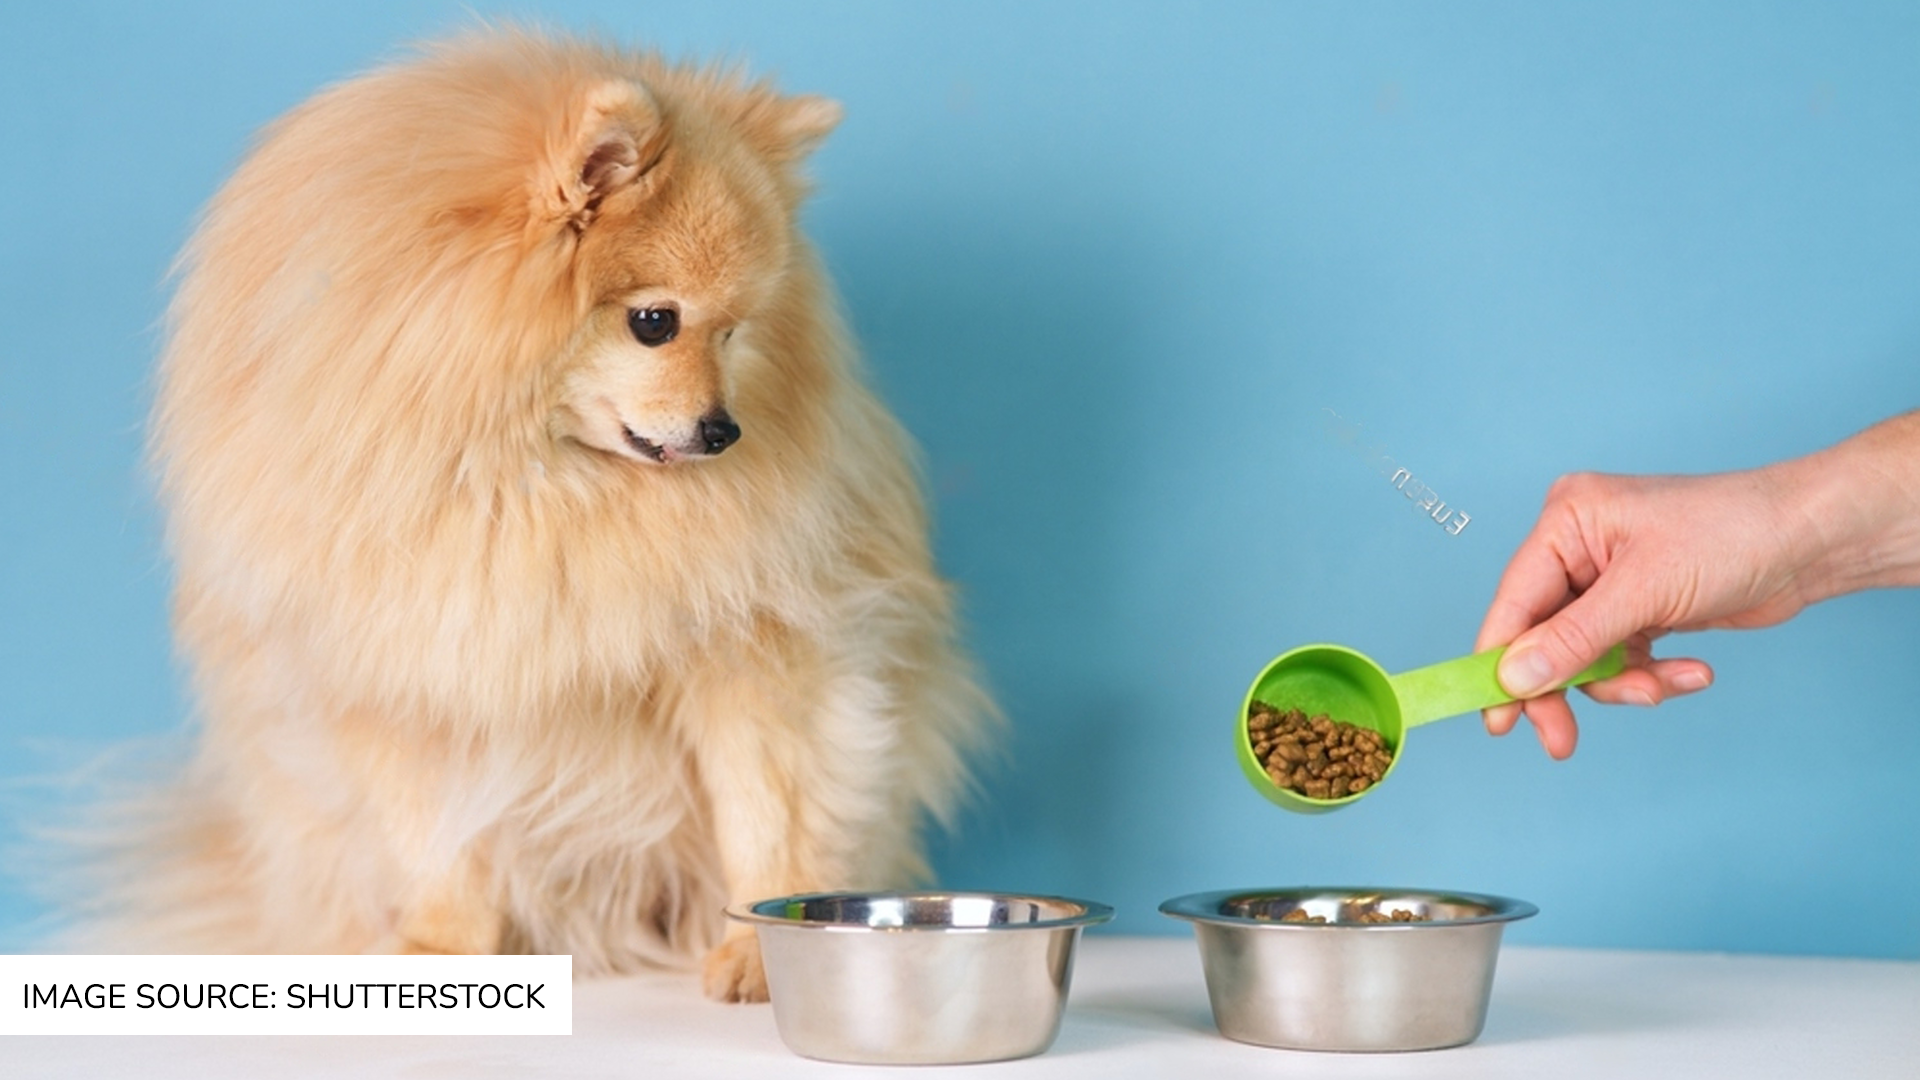 How to transition your pet to new food